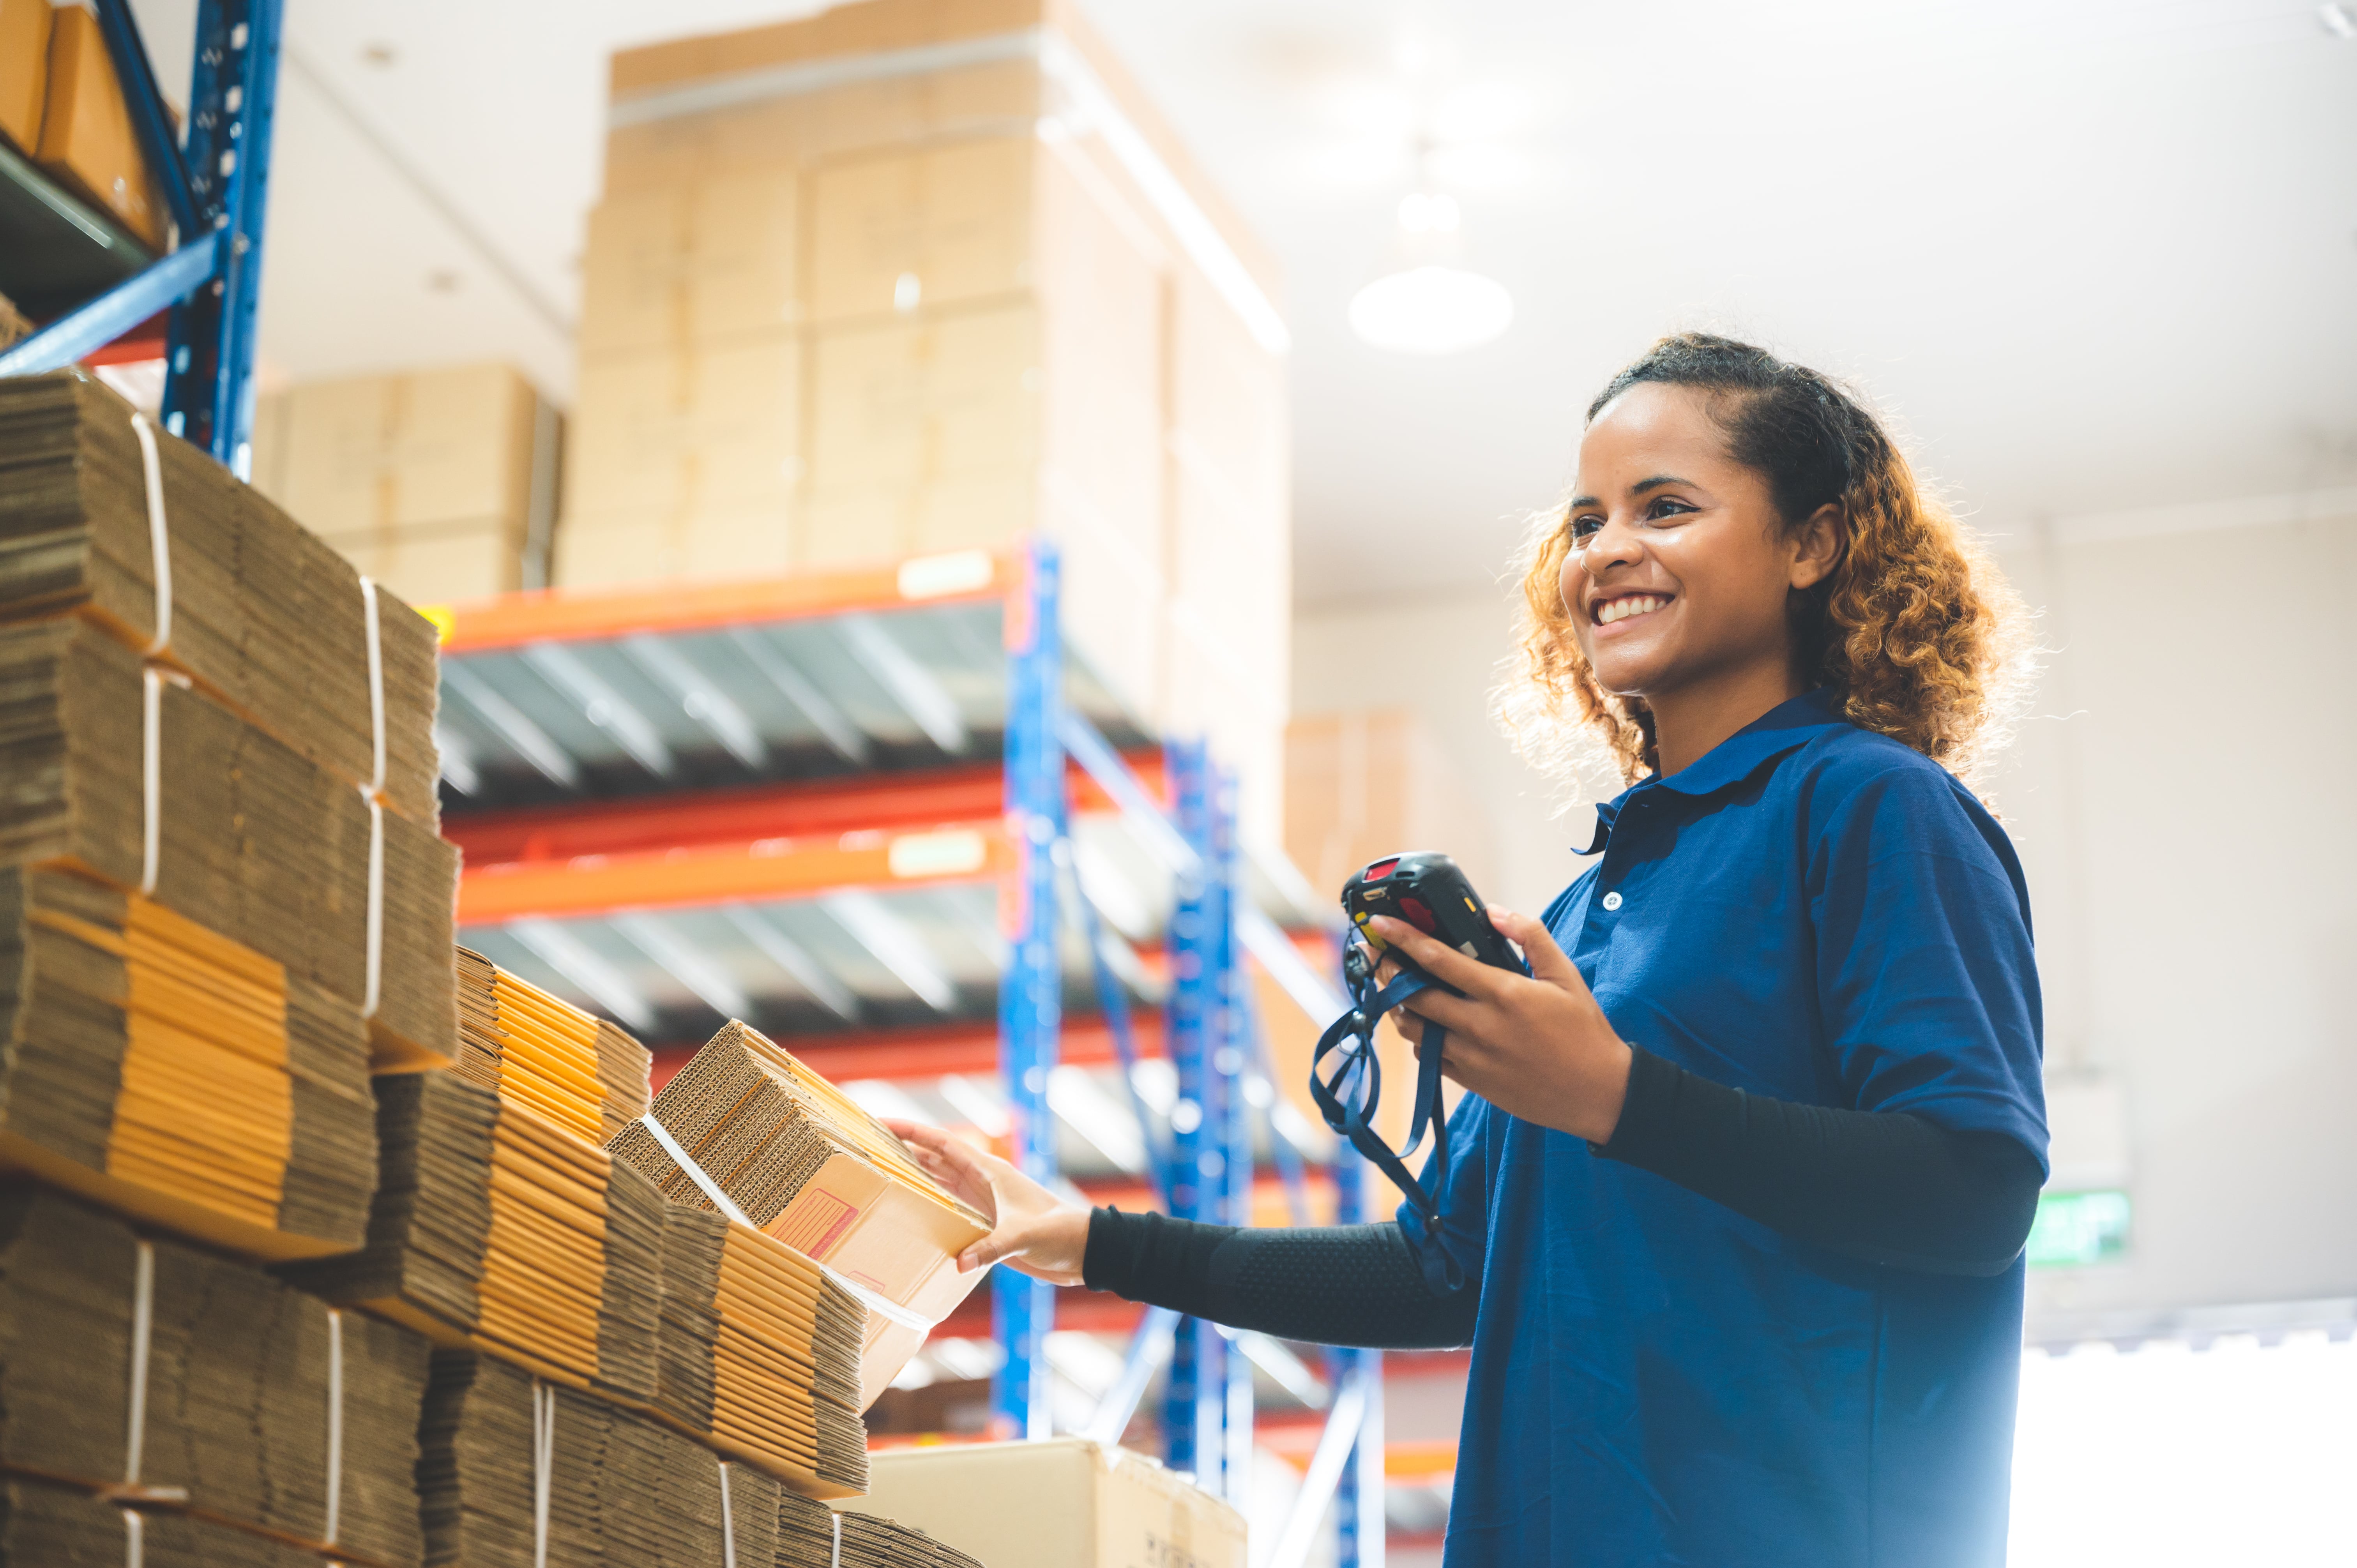 A warehouse worker wearing a blue polo scanning inventory and smiling.